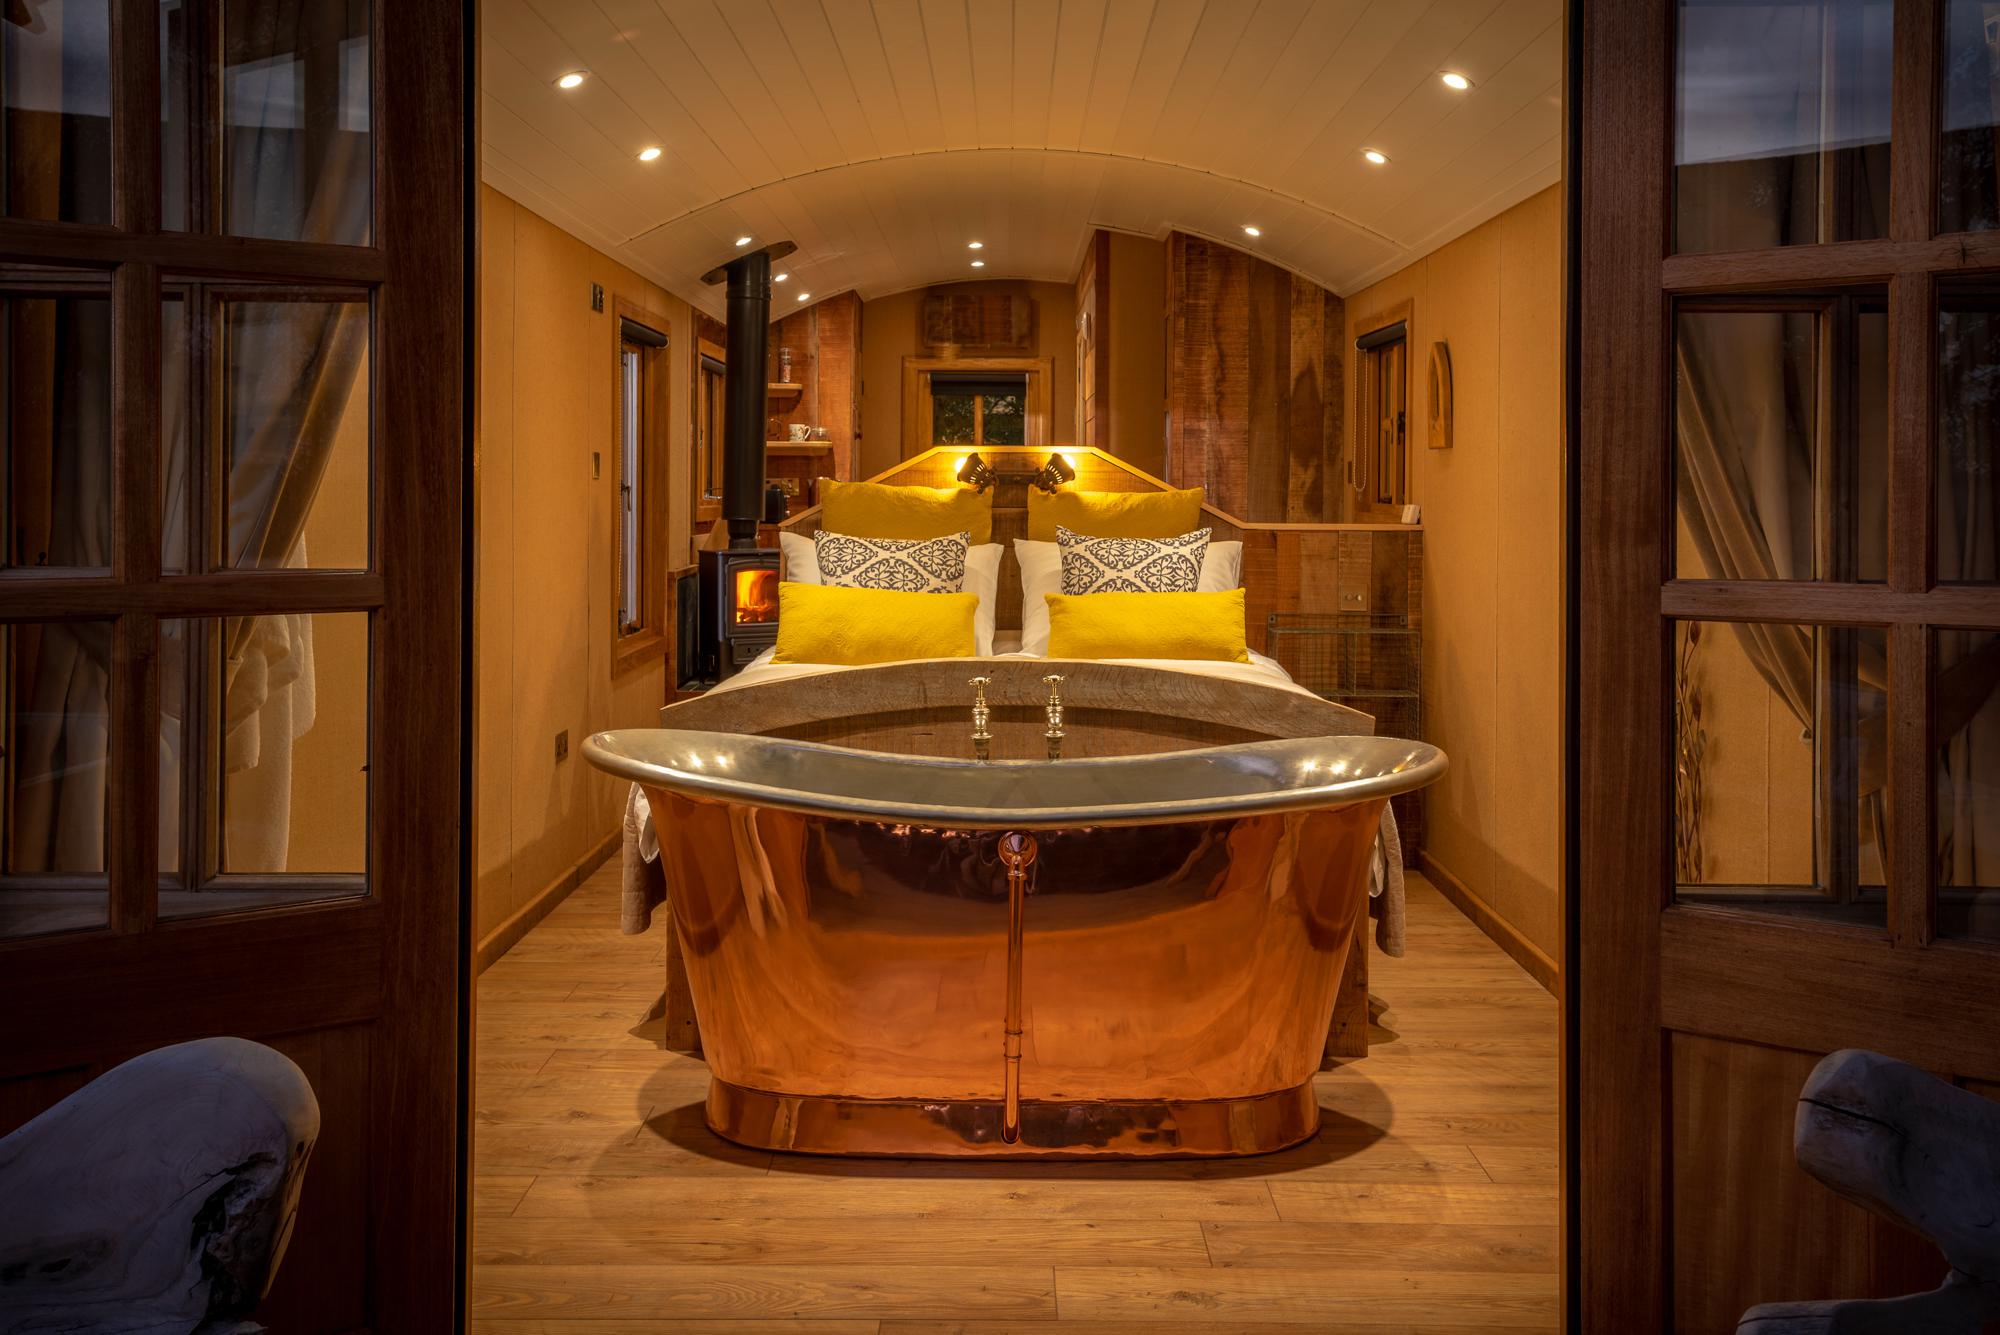 En-suite glamping accommodation | Glamping sites with en-suite bathrooms